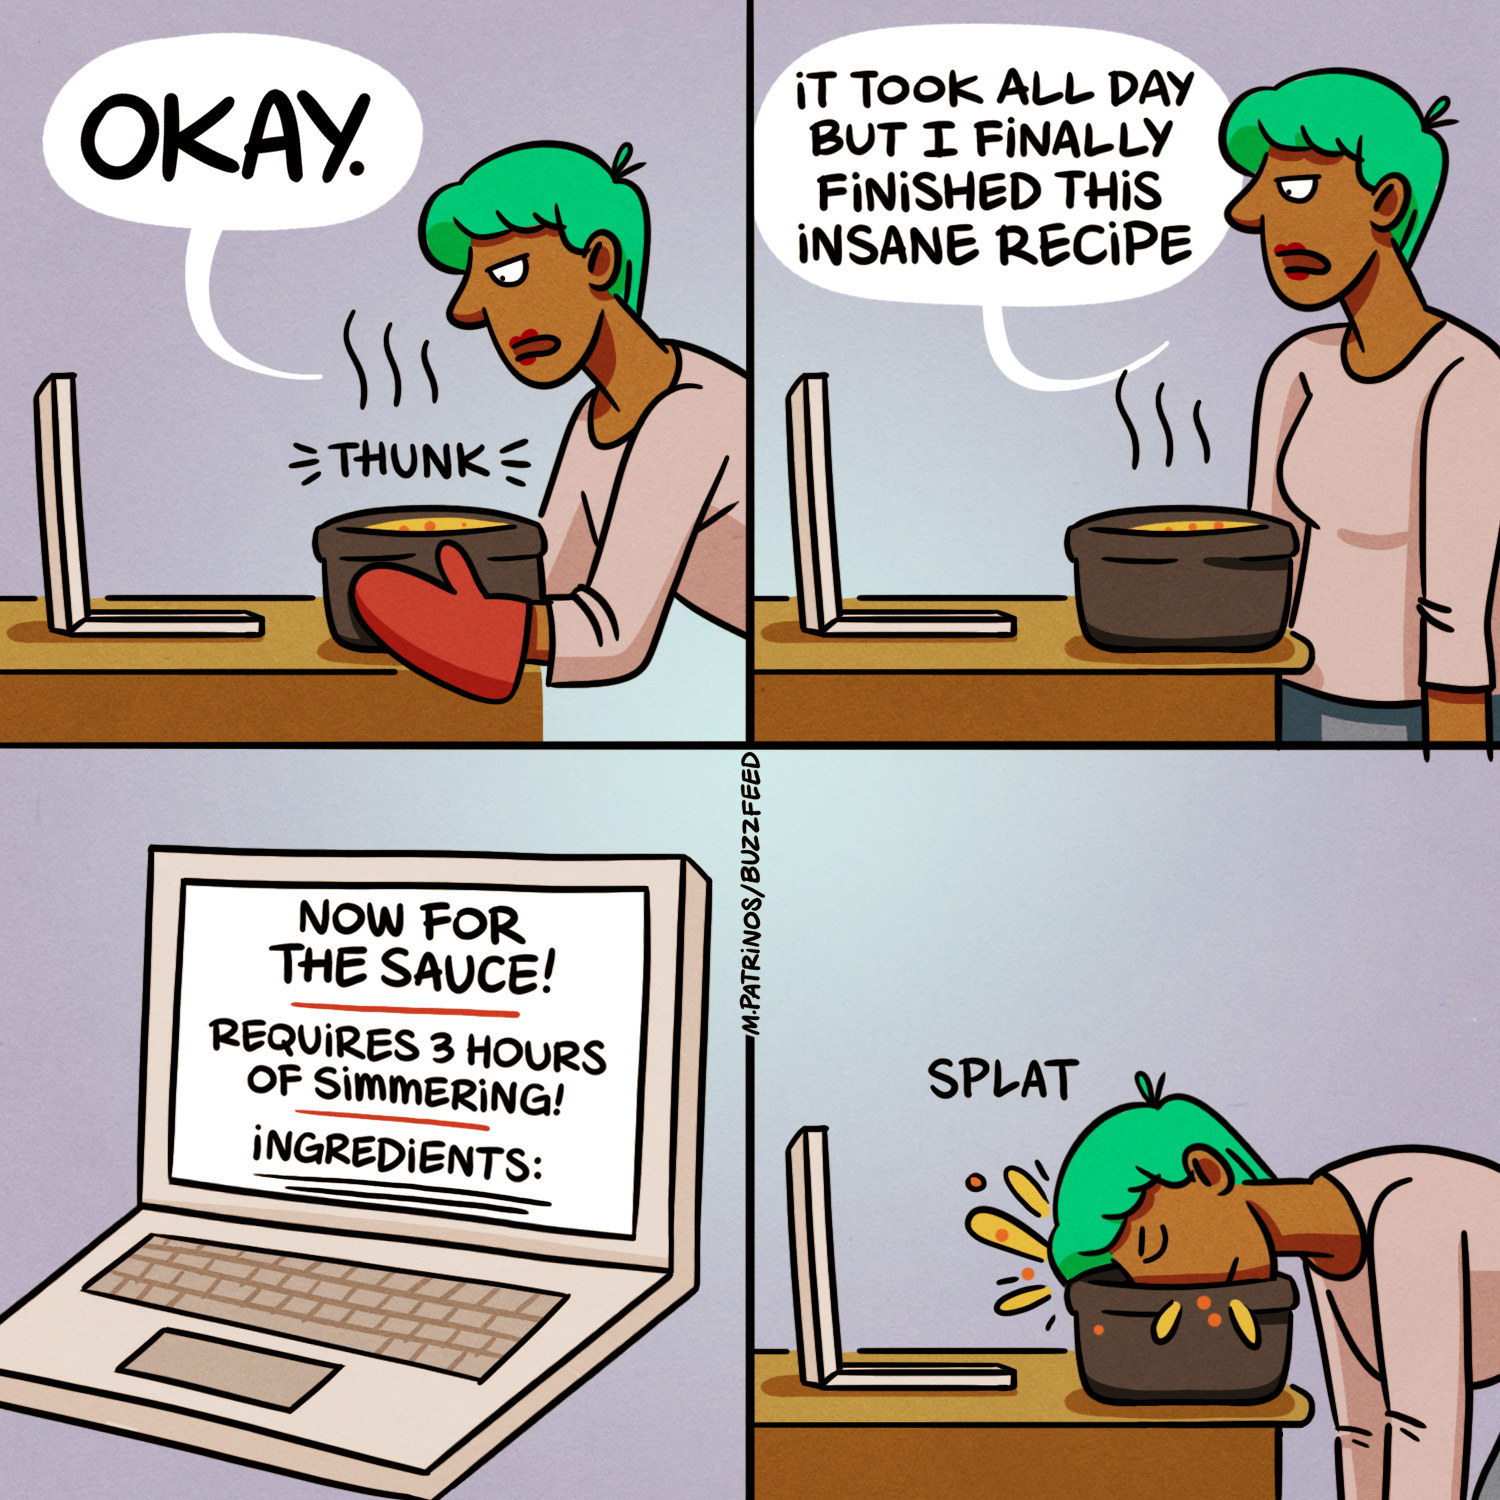 Cartoon showing a woman who regrets not reading the recipe all the way through